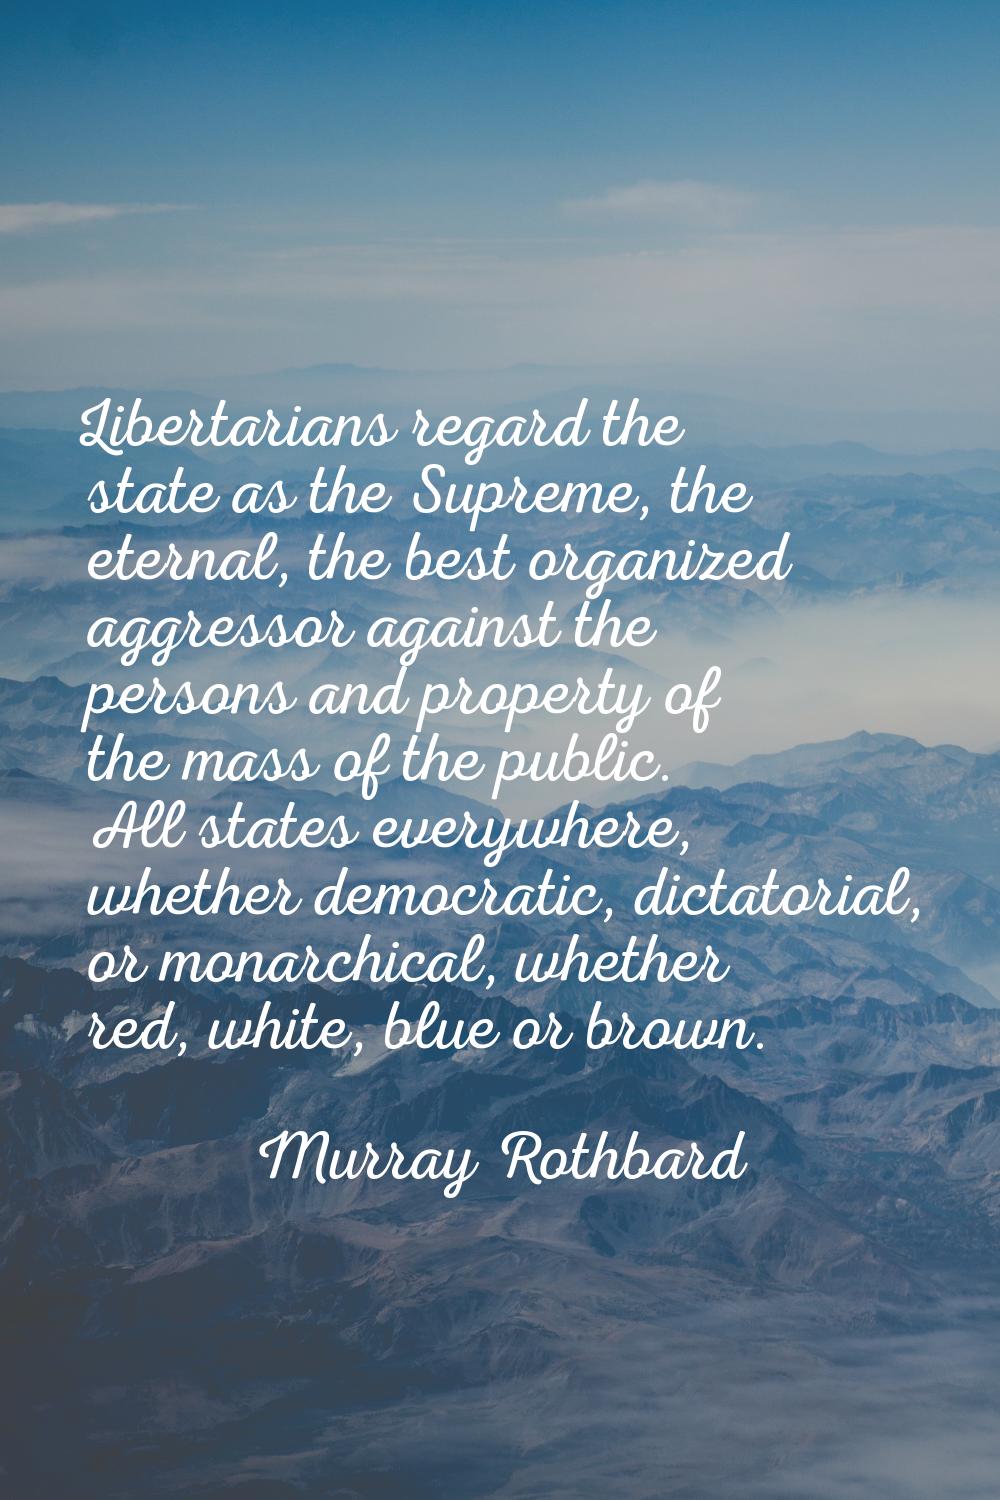 Libertarians regard the state as the Supreme, the eternal, the best organized aggressor against the